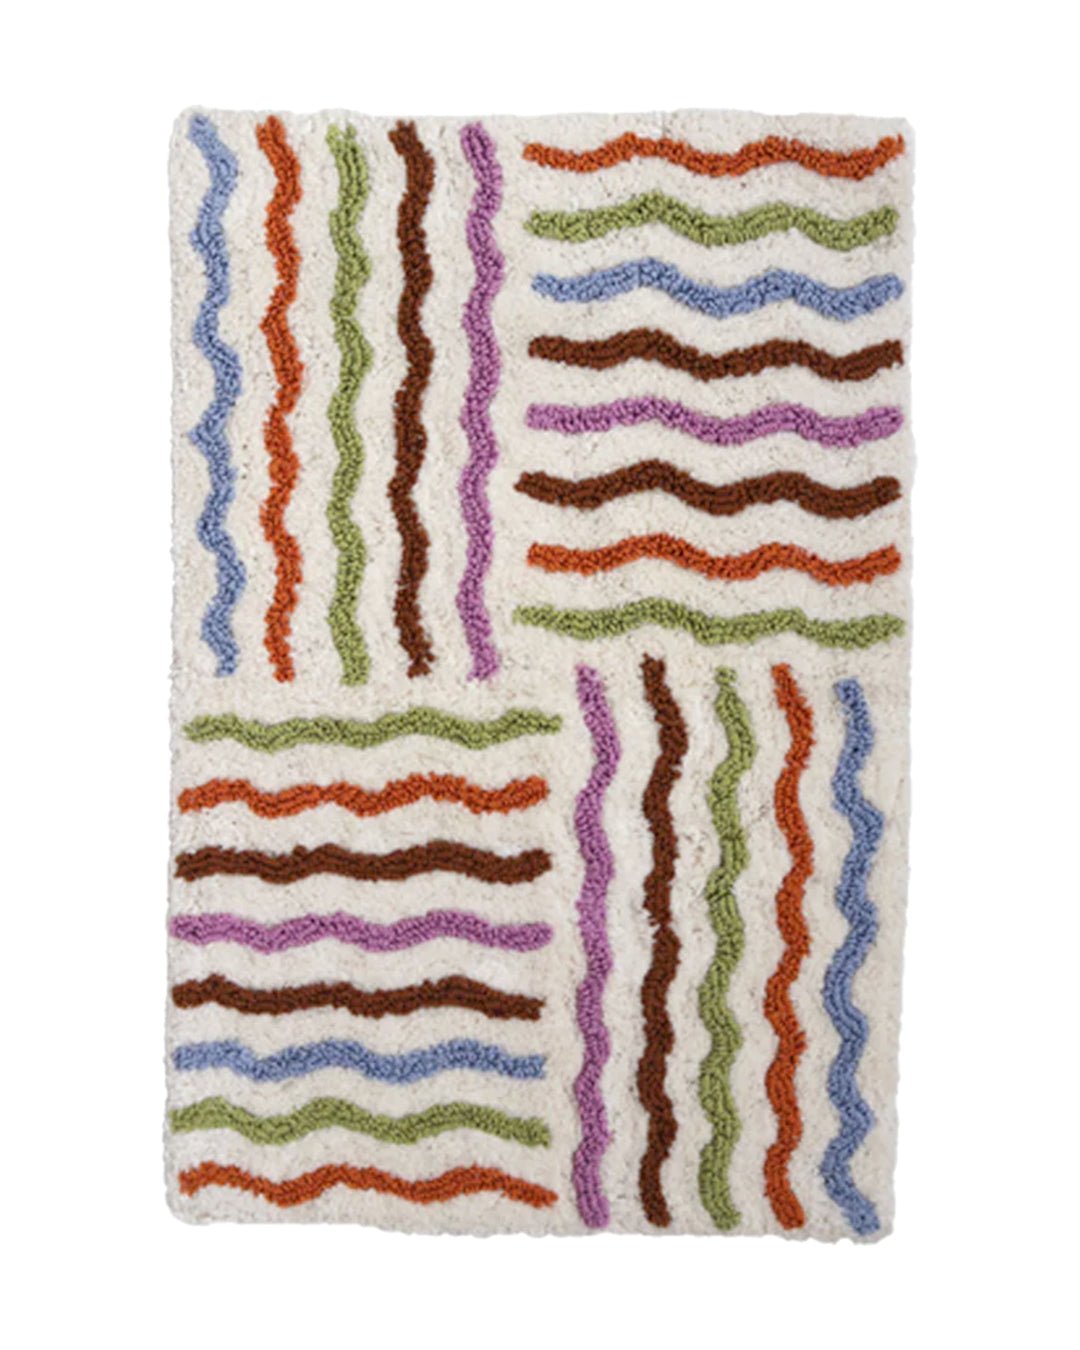 Add some colour to your bathroom with the Ripple Bath Mat. This modern, abstract design features a mix of saturated hues on a neutral base to complement any bathroom style. Making bathroom time fun for kids.